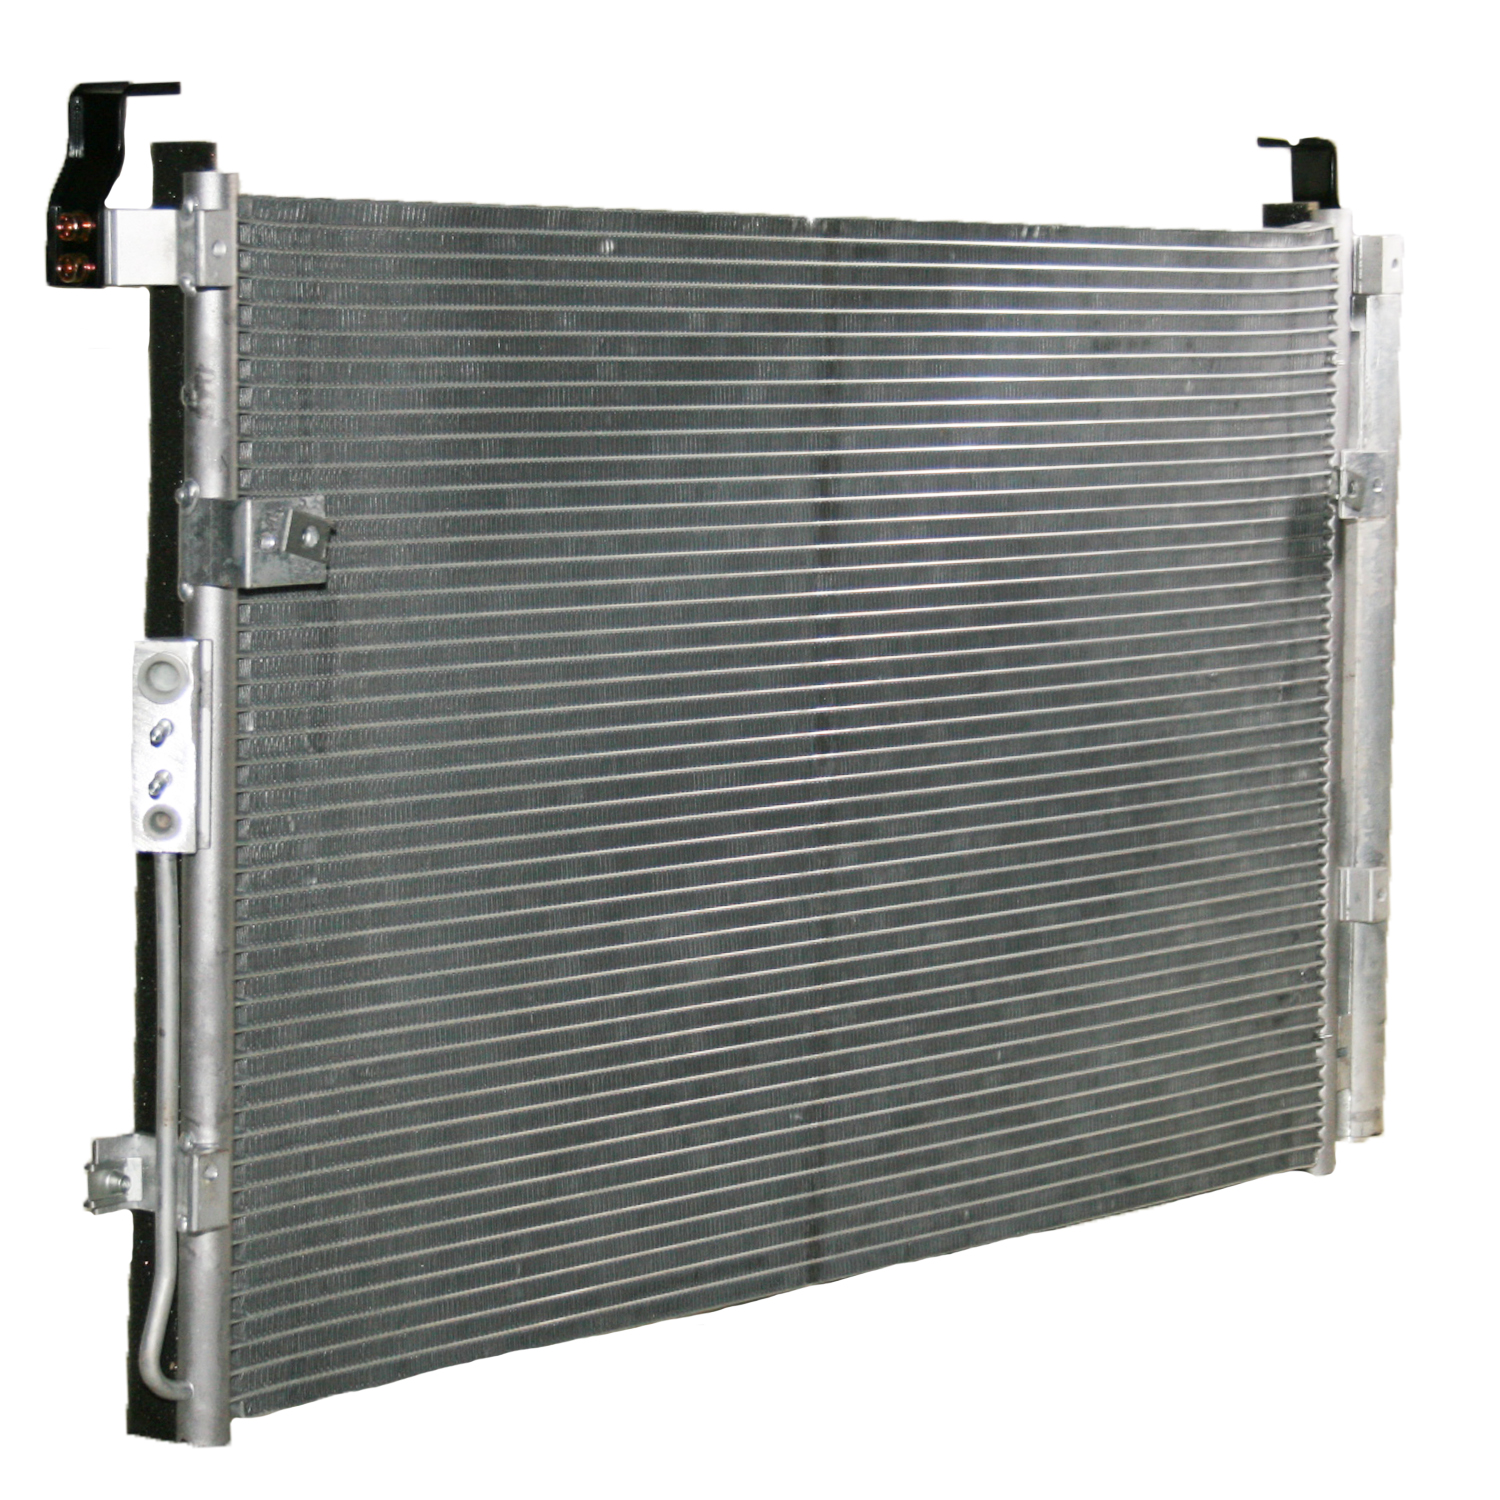 TCW Condenser 44-3578 New Product Image field_60b6a13a6e67c